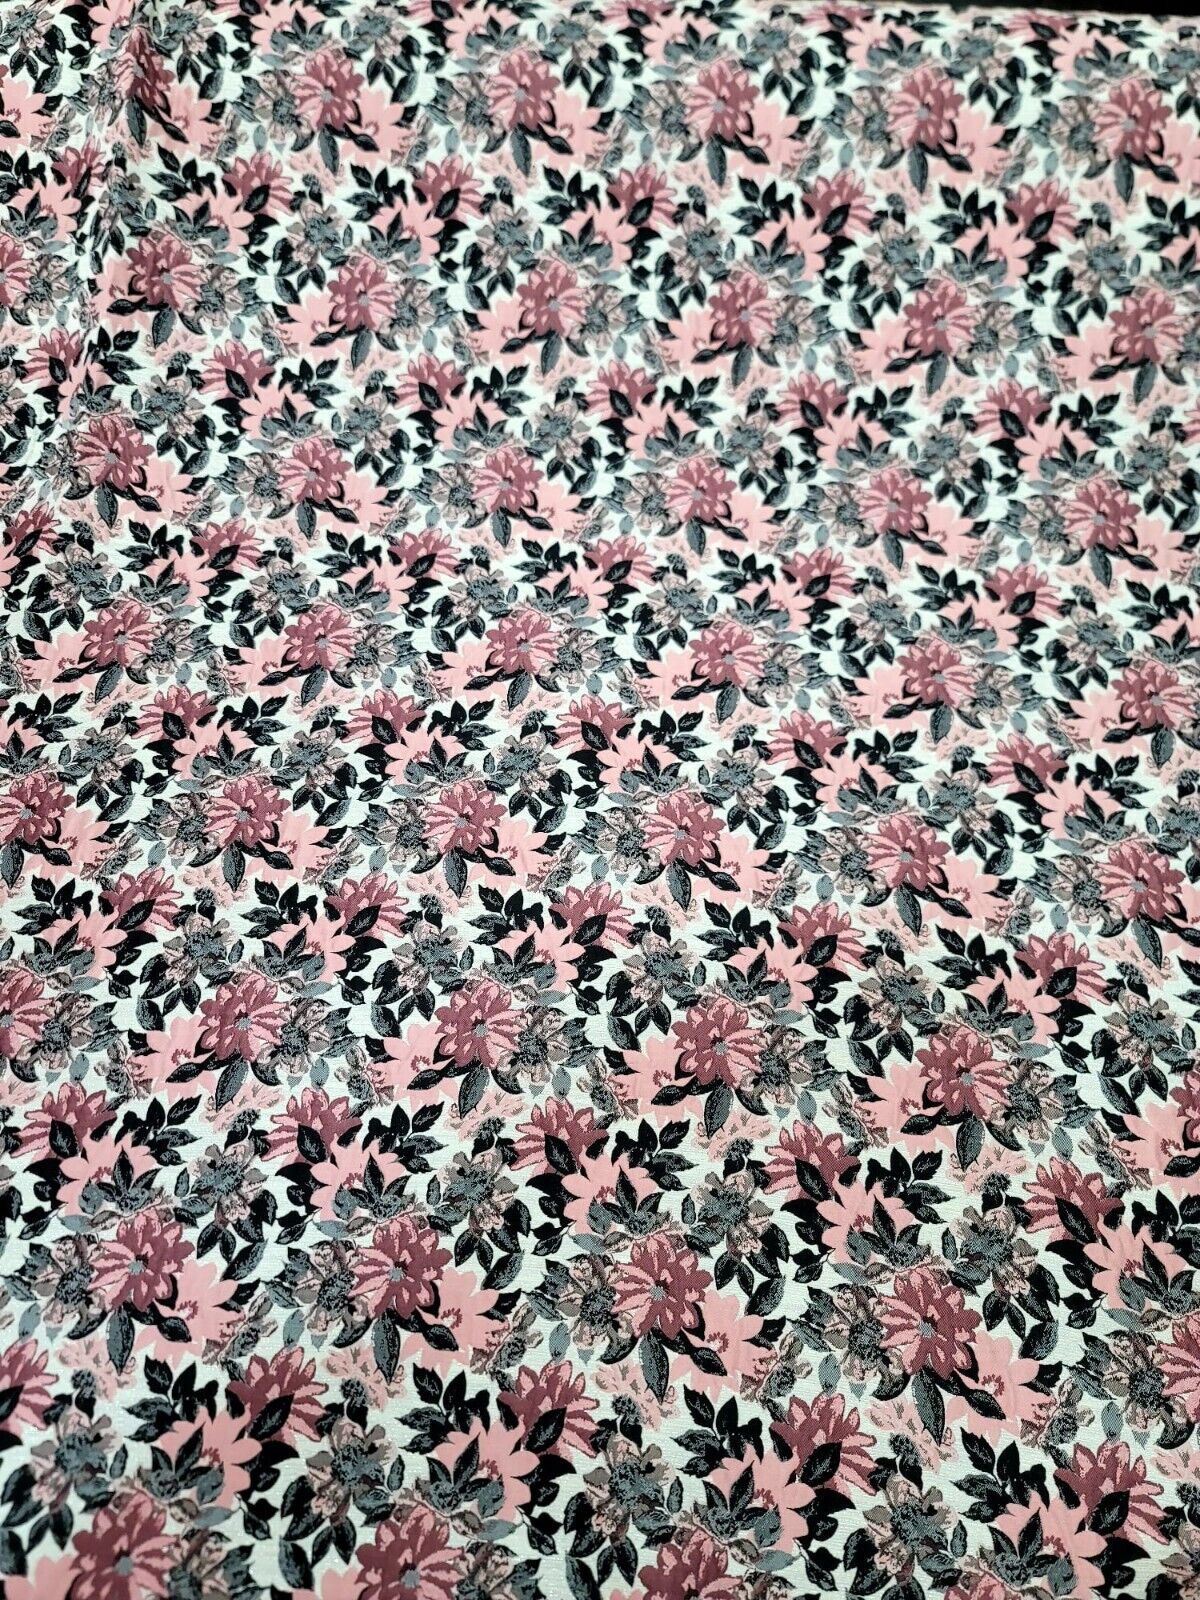 Dusty Rose Mauve Floral Chenille Upholstery Brocade Fabric - 56" Width - Sold by the Yard - Perfect for Pillows, Cushions, and Home Decor